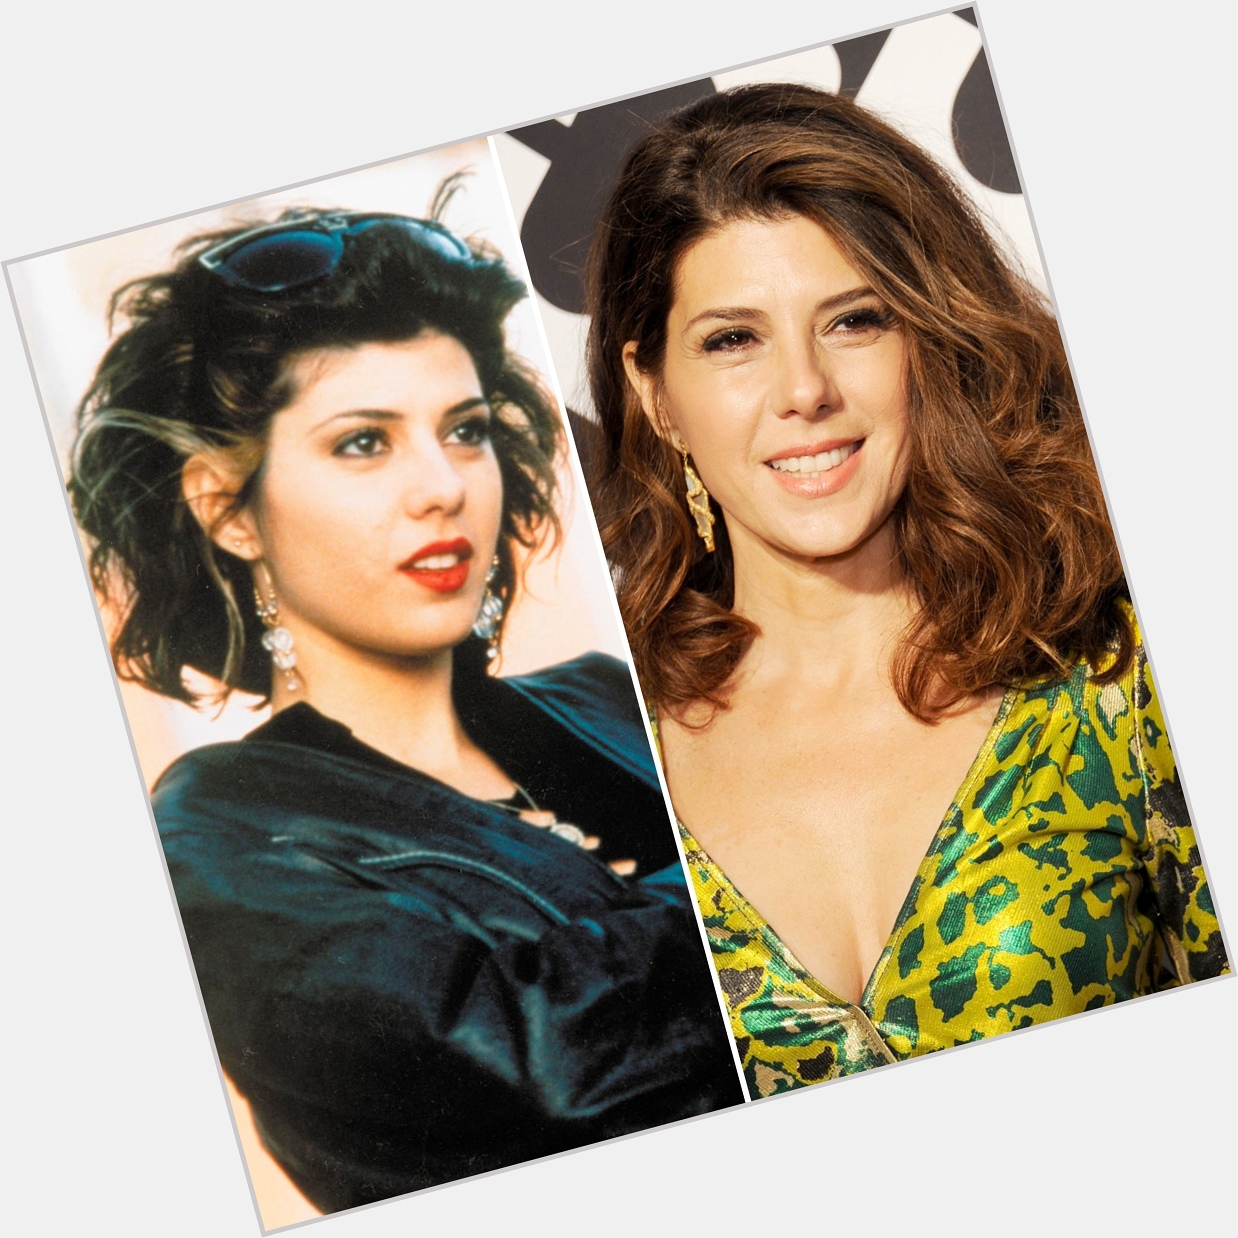 Happy 56th birthday to Marisa Tomei!! 

What instantly comes to mind when you think of Marisa\s career? 